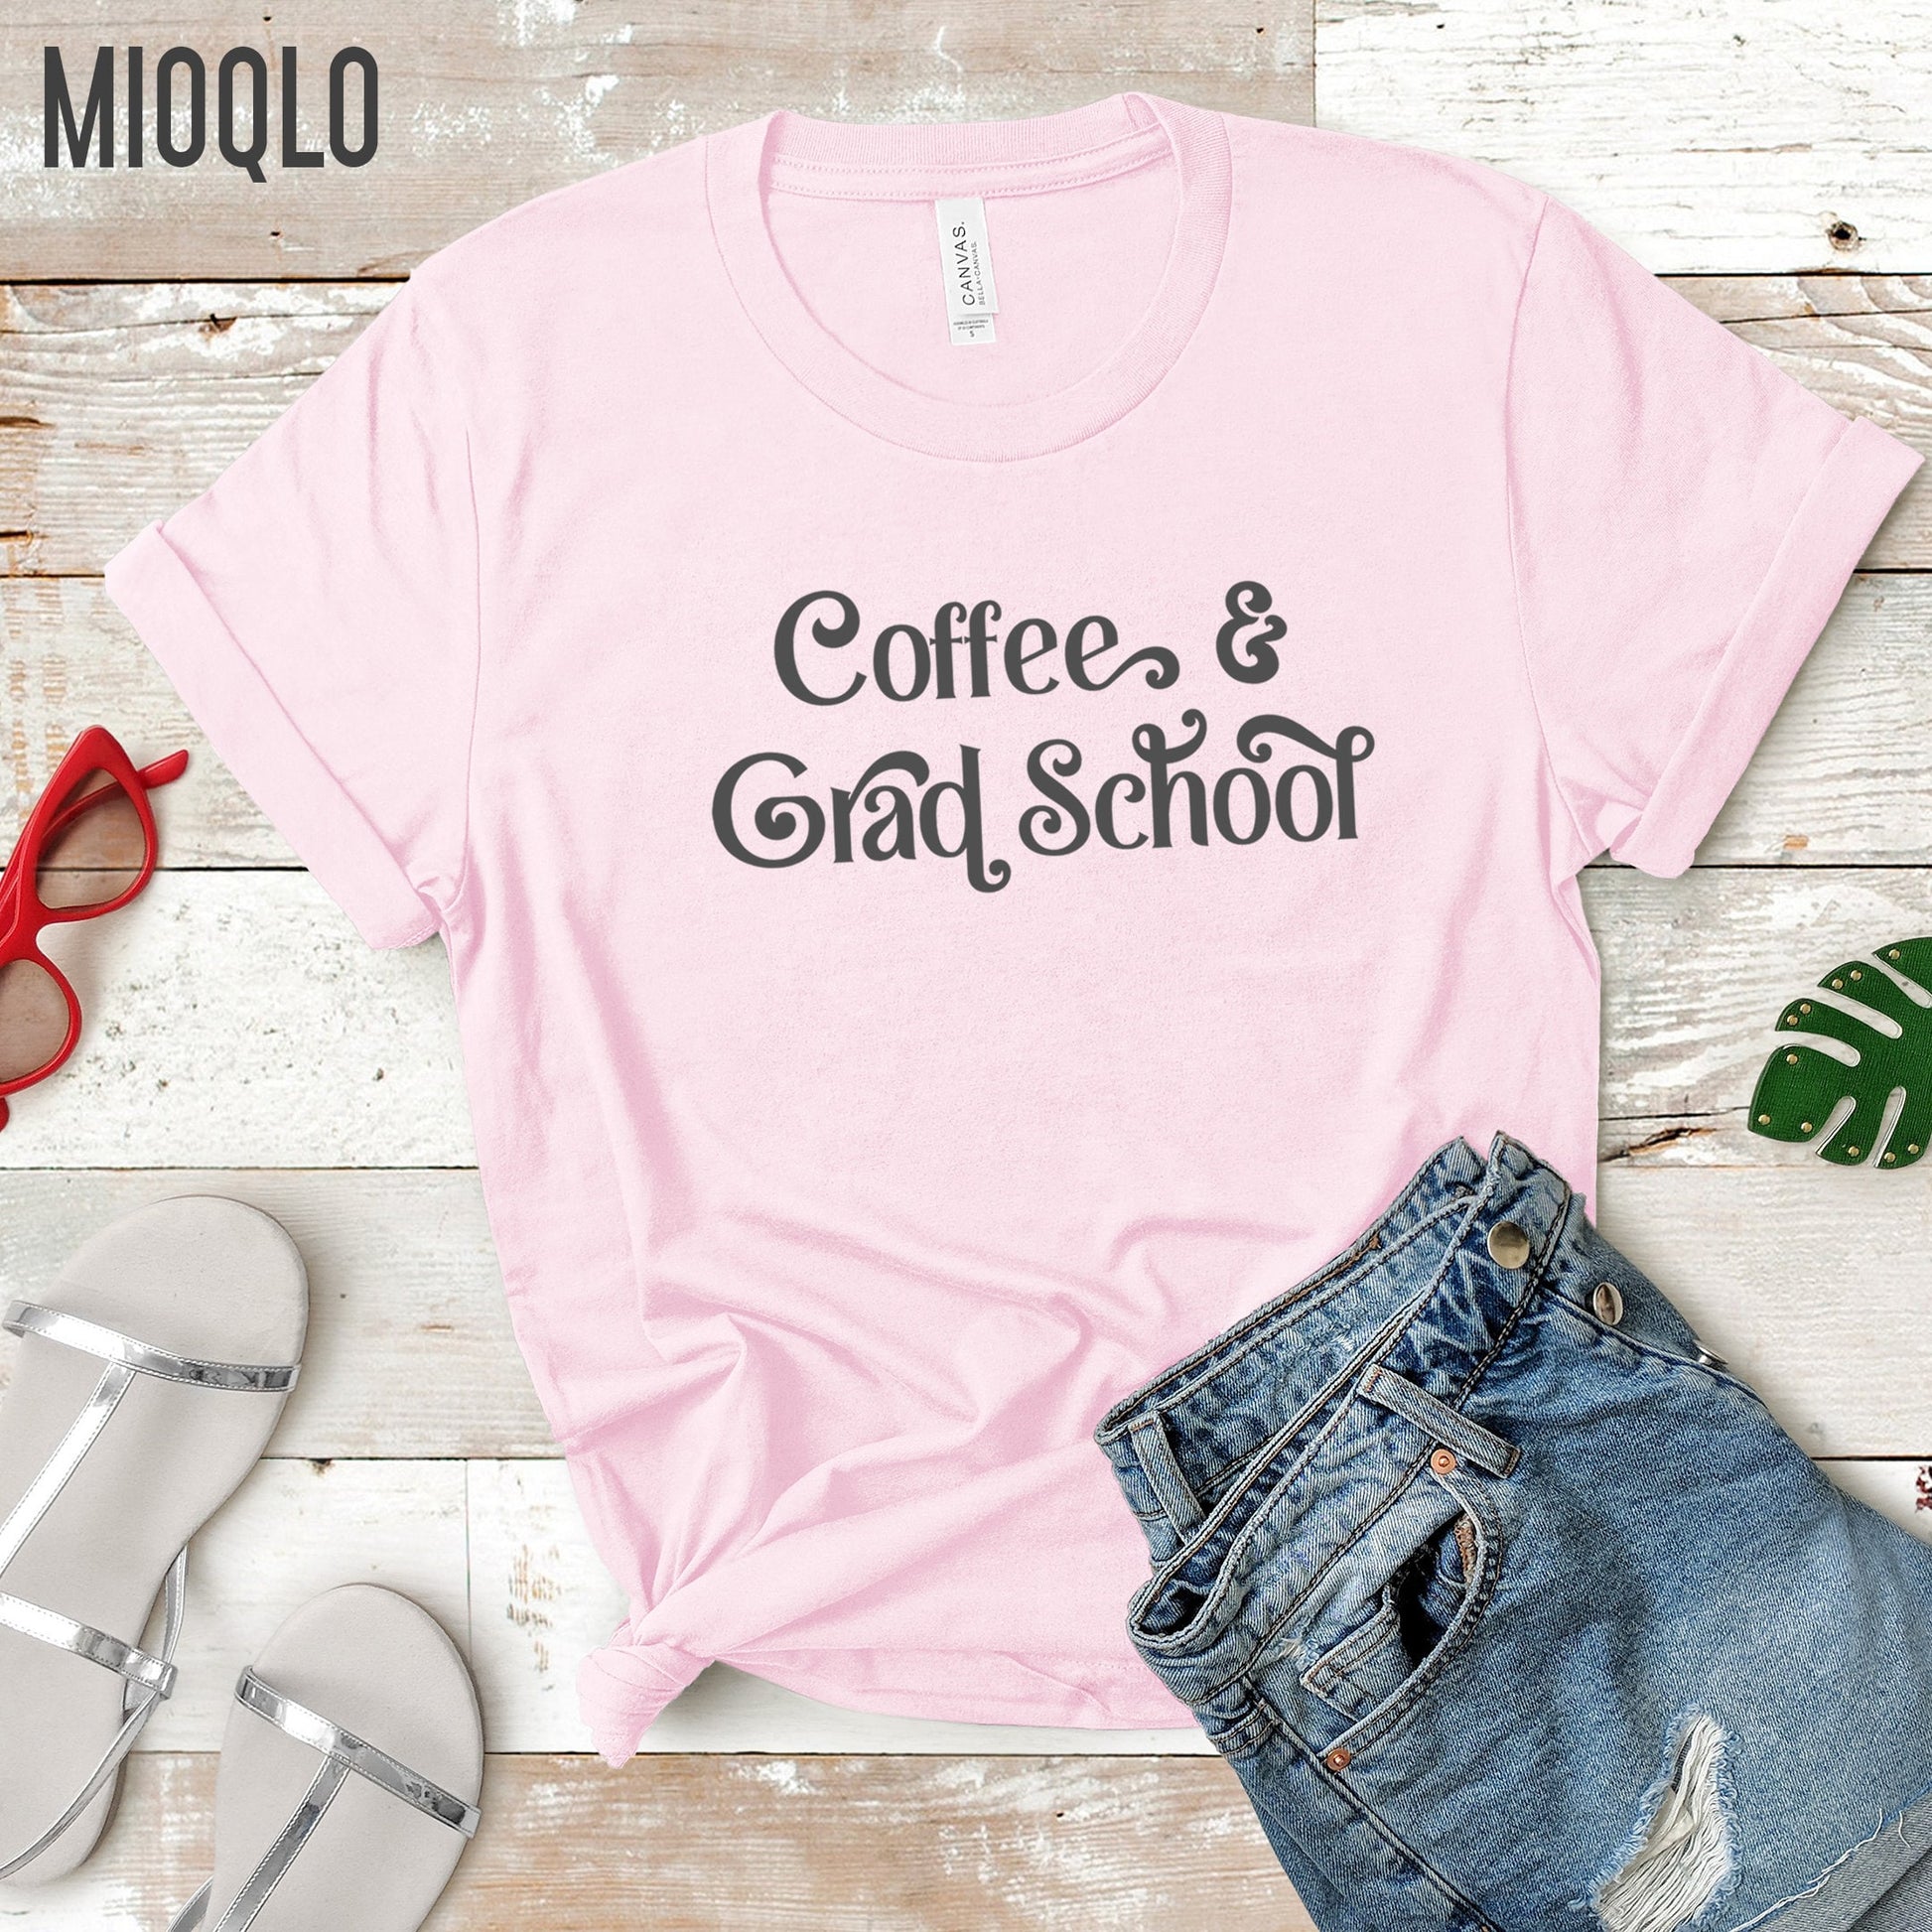 Coffee and Grad School Shirt, Phd Student, Phd Tee, Doctorate Gifts, Masters Degree Student Shirt, mba Graduate Degree Gift, Grad Student